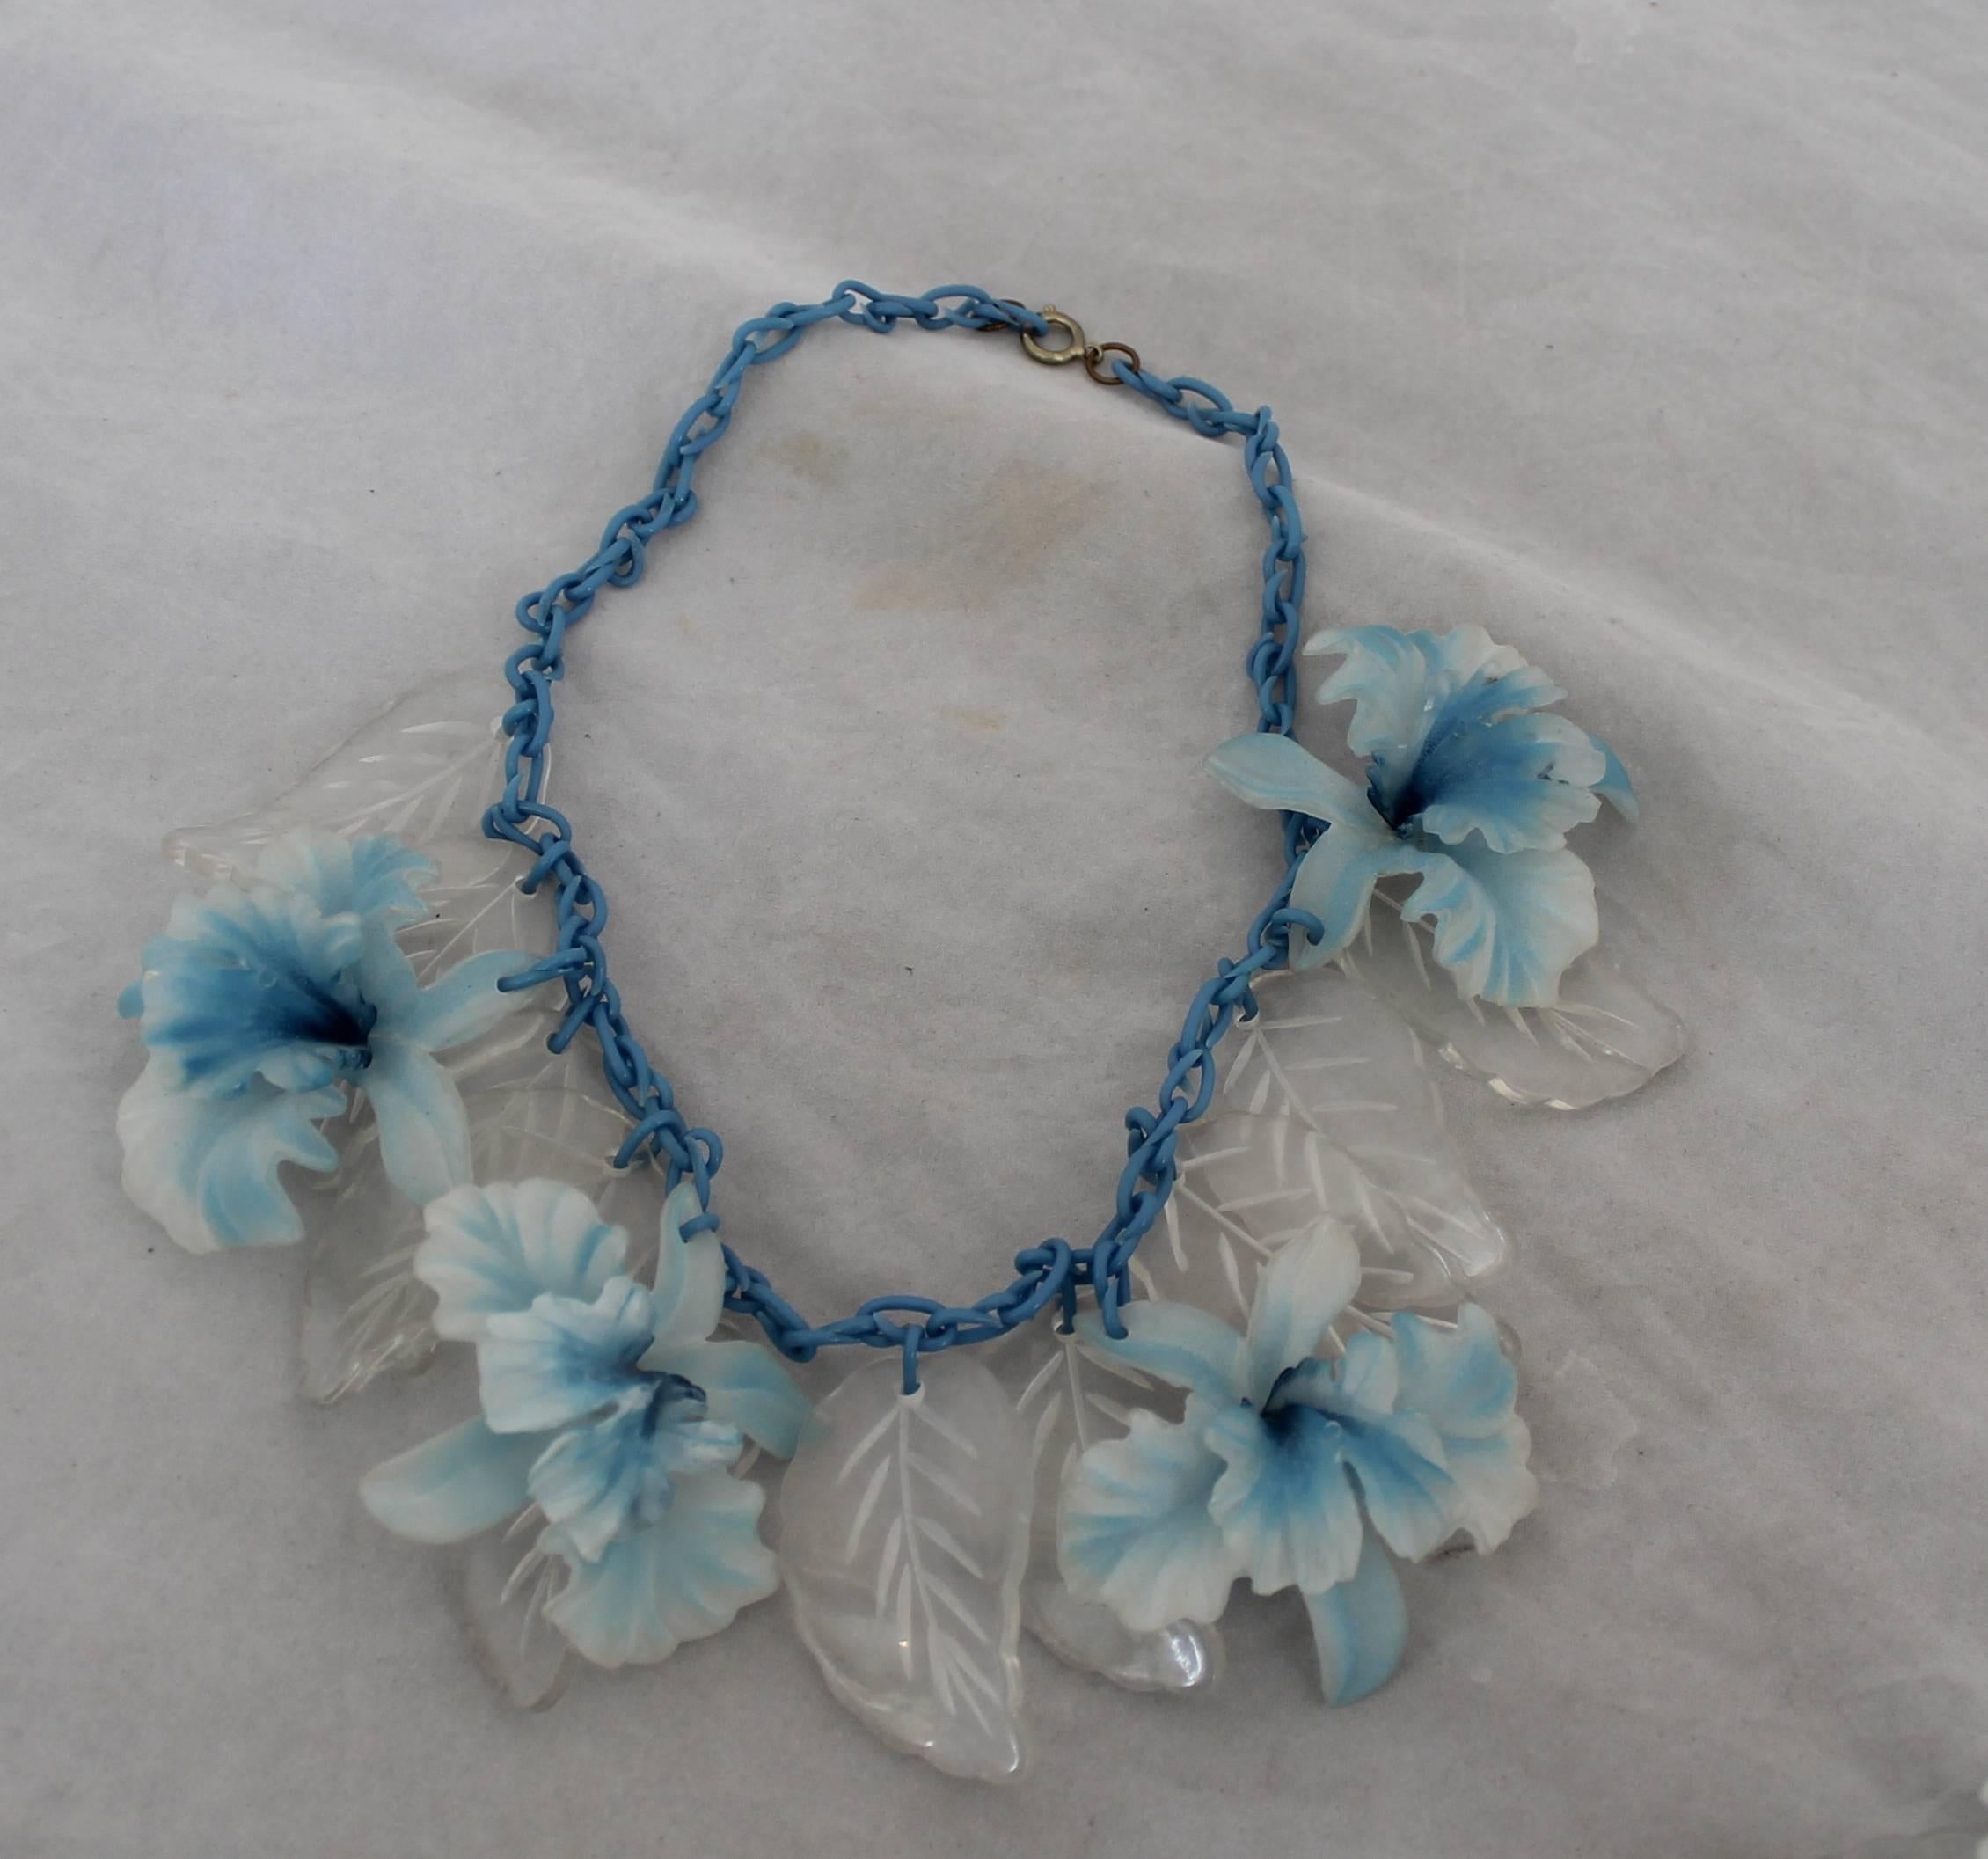 Vintage Blue Celluloid & Reverse Carved Lucite Demi Parure.  This fun set of necklace and earrings is in good vintage condition with some wear consistent with age.  It features a blue celluloid and reverse carved Lucite.

Measurements:
Necklace